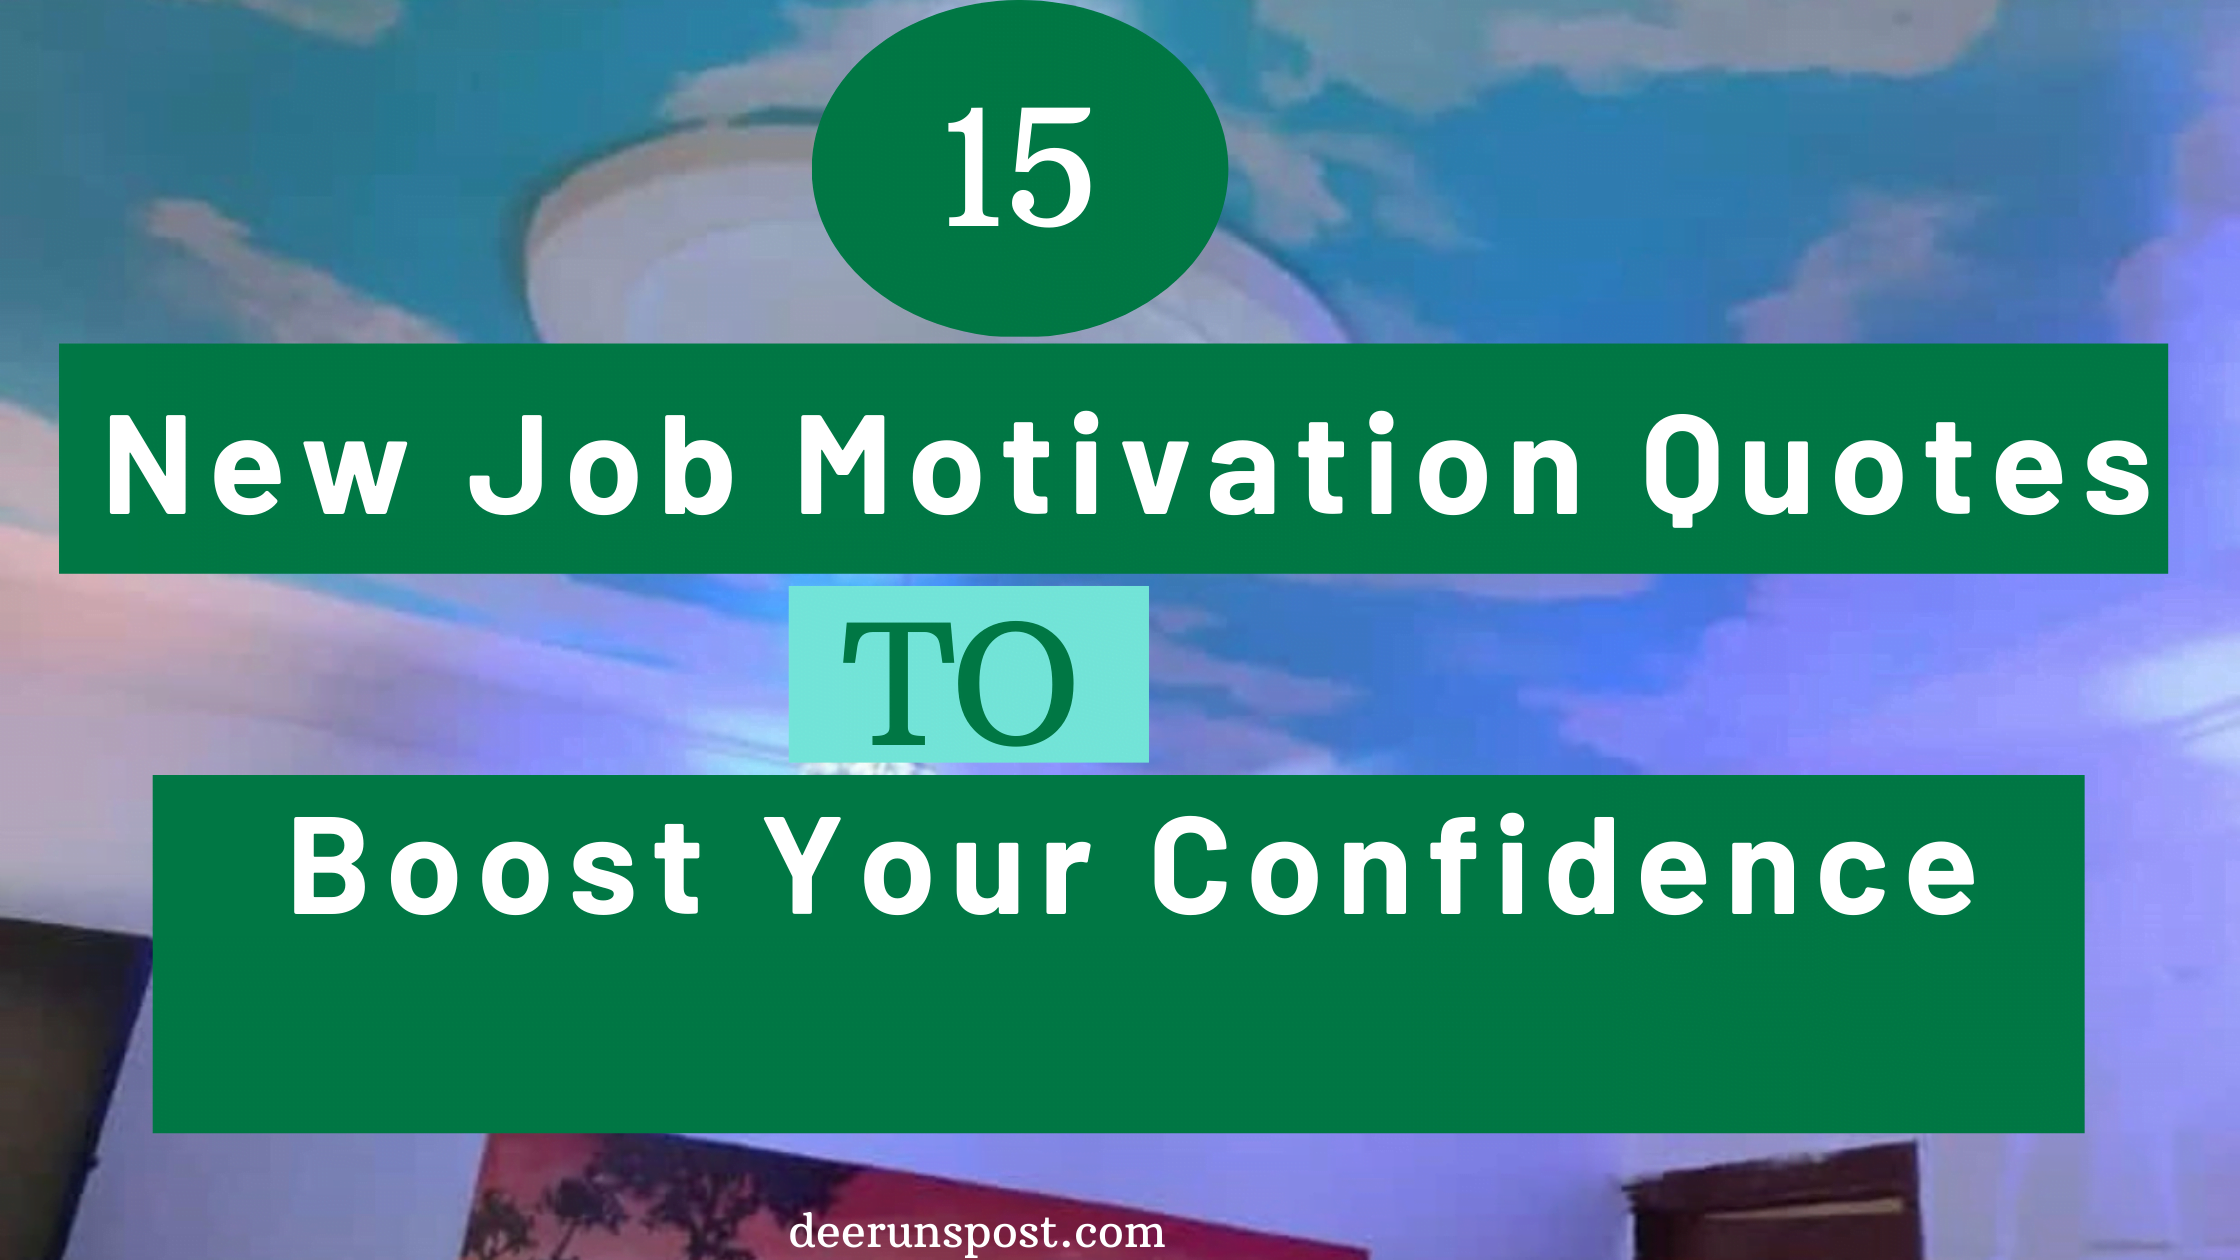 15 New Job Motivation Quotes to Boost Your Confidence